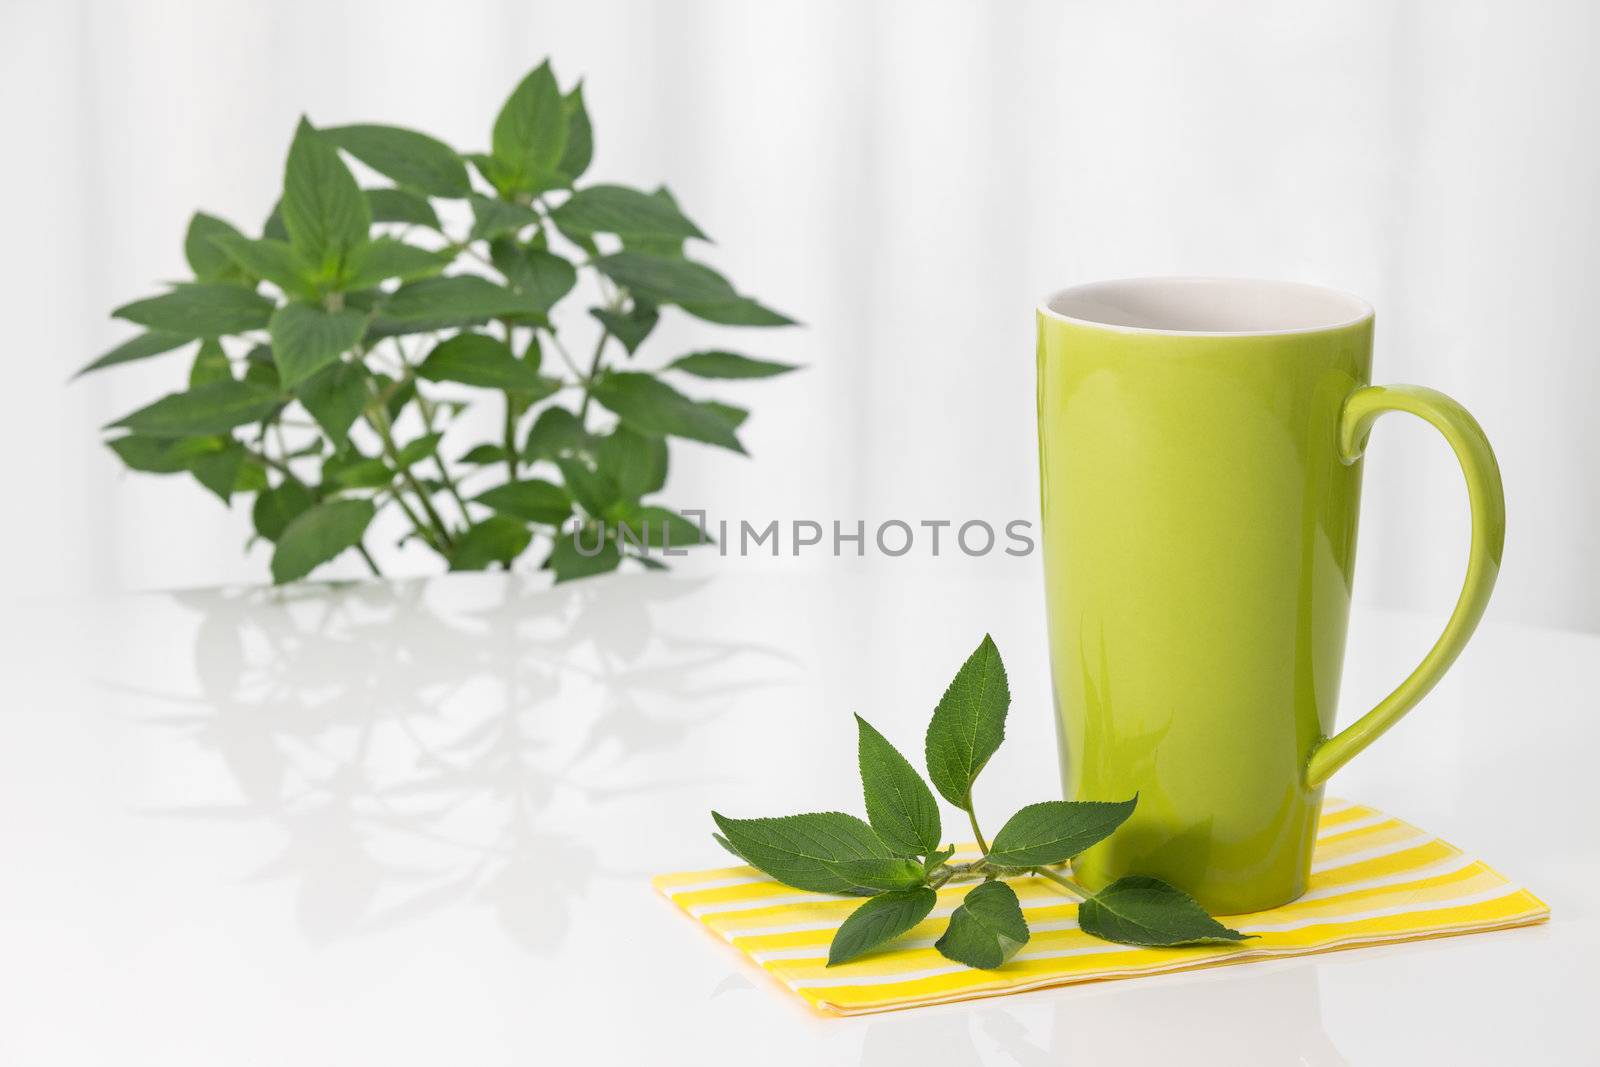 Big green teacup and fresh mint, on a white table.